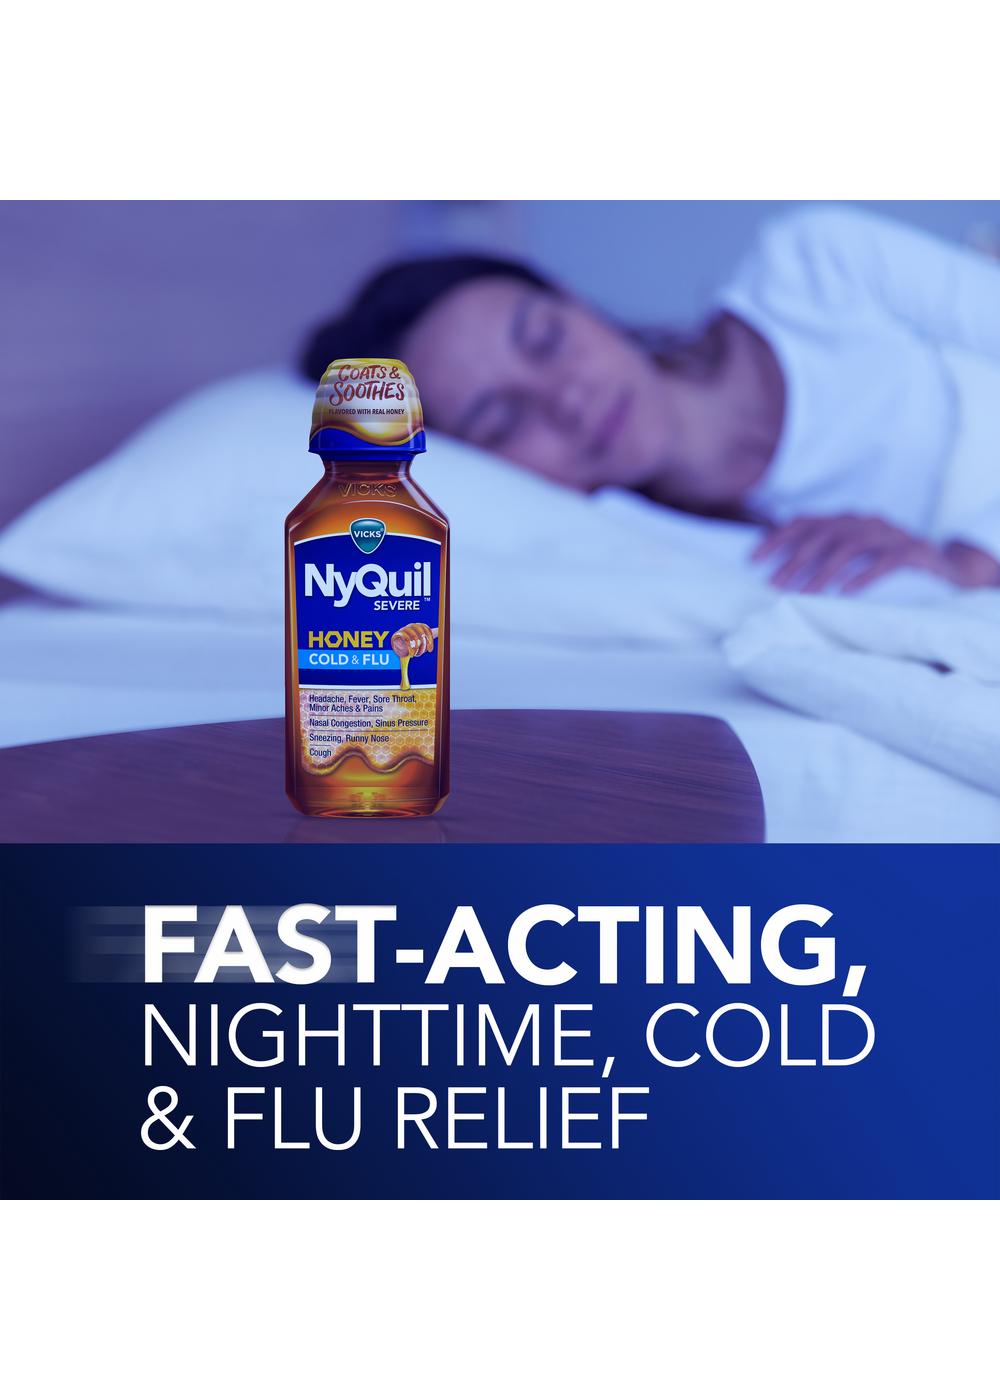 Vicks NyQuil SEVERE Cold & Flu Liquid - Honey; image 8 of 11